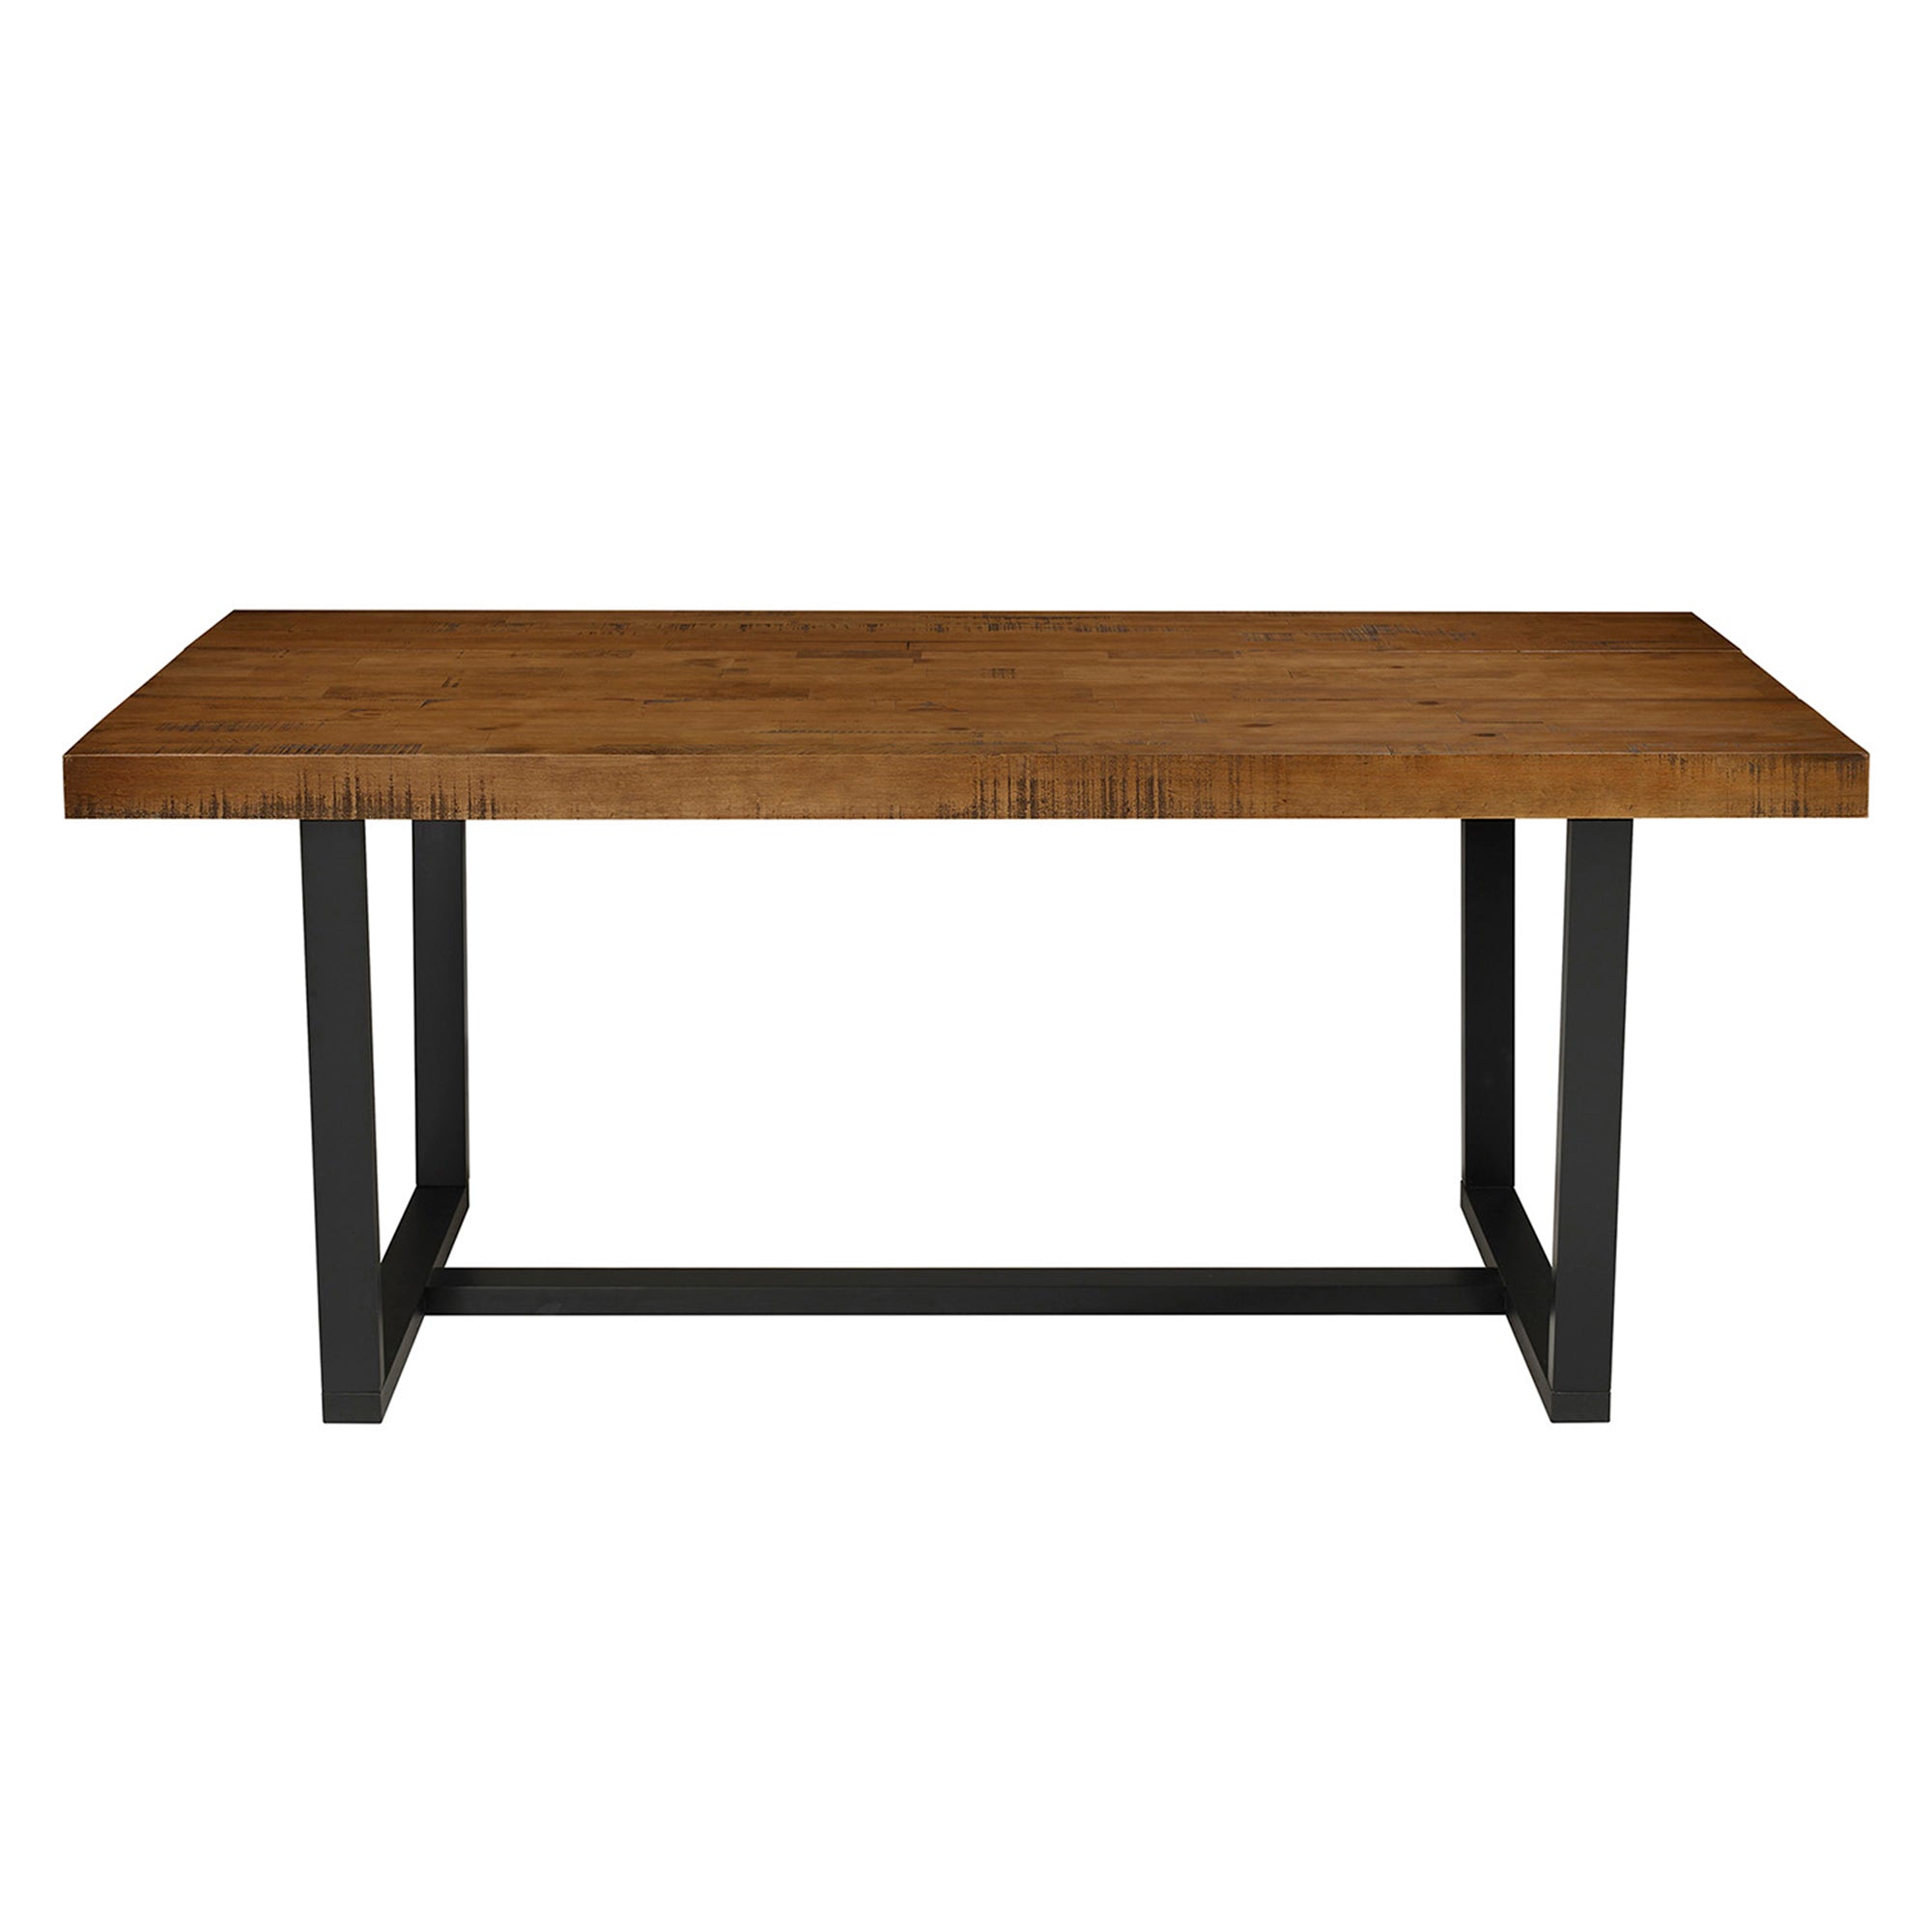 Durango 72" Rustic Solid Wood Dining Table - East Shore Modern Home Furnishings